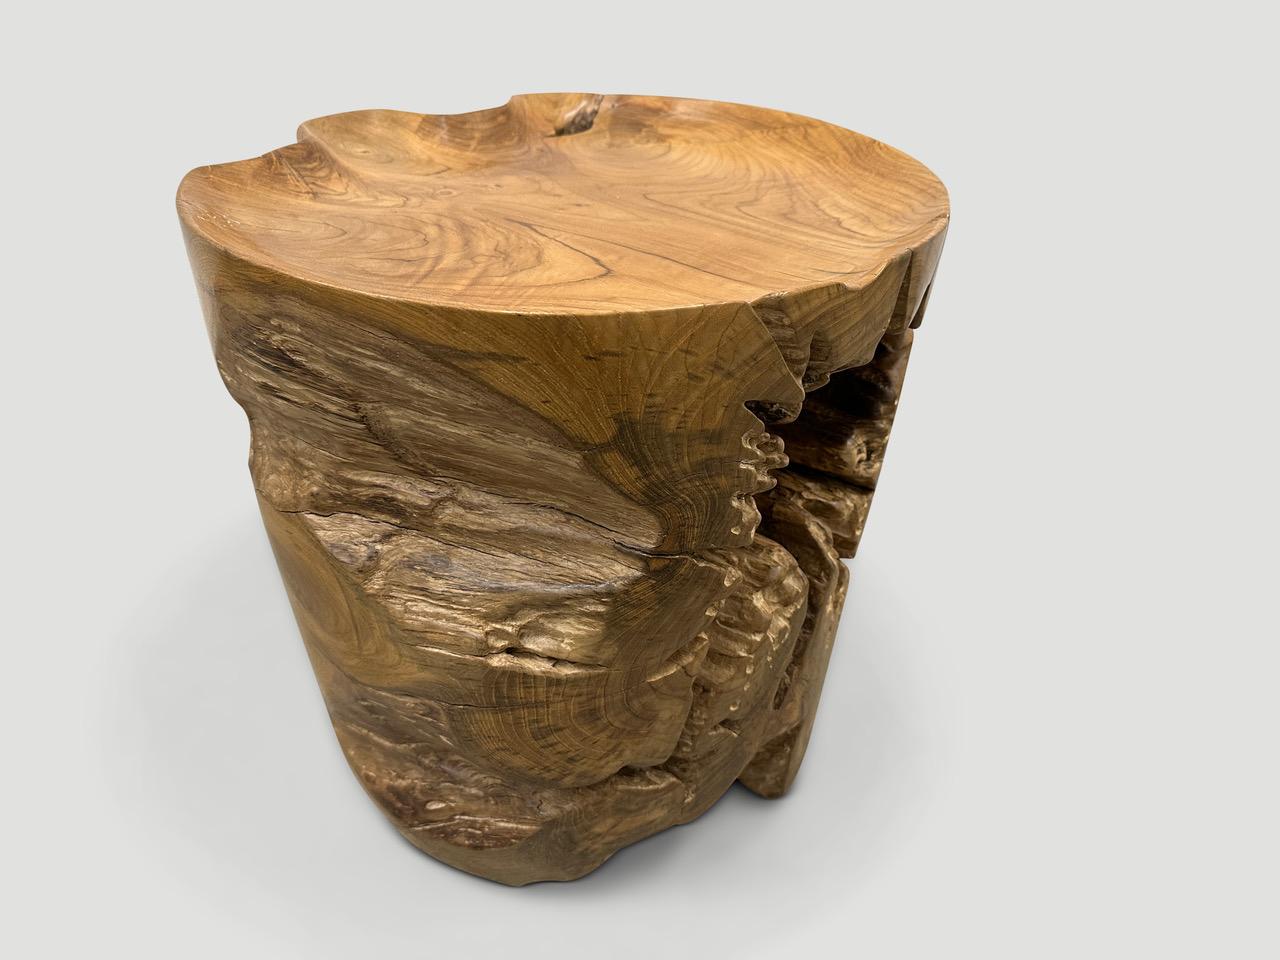 Natural organic formed reclaimed teak wood root side table. We hand carved the top section into a tray style and polished the aged teak with a natural oil revealing the beautiful wood grain. The inner sections are sanded and left unpolished in